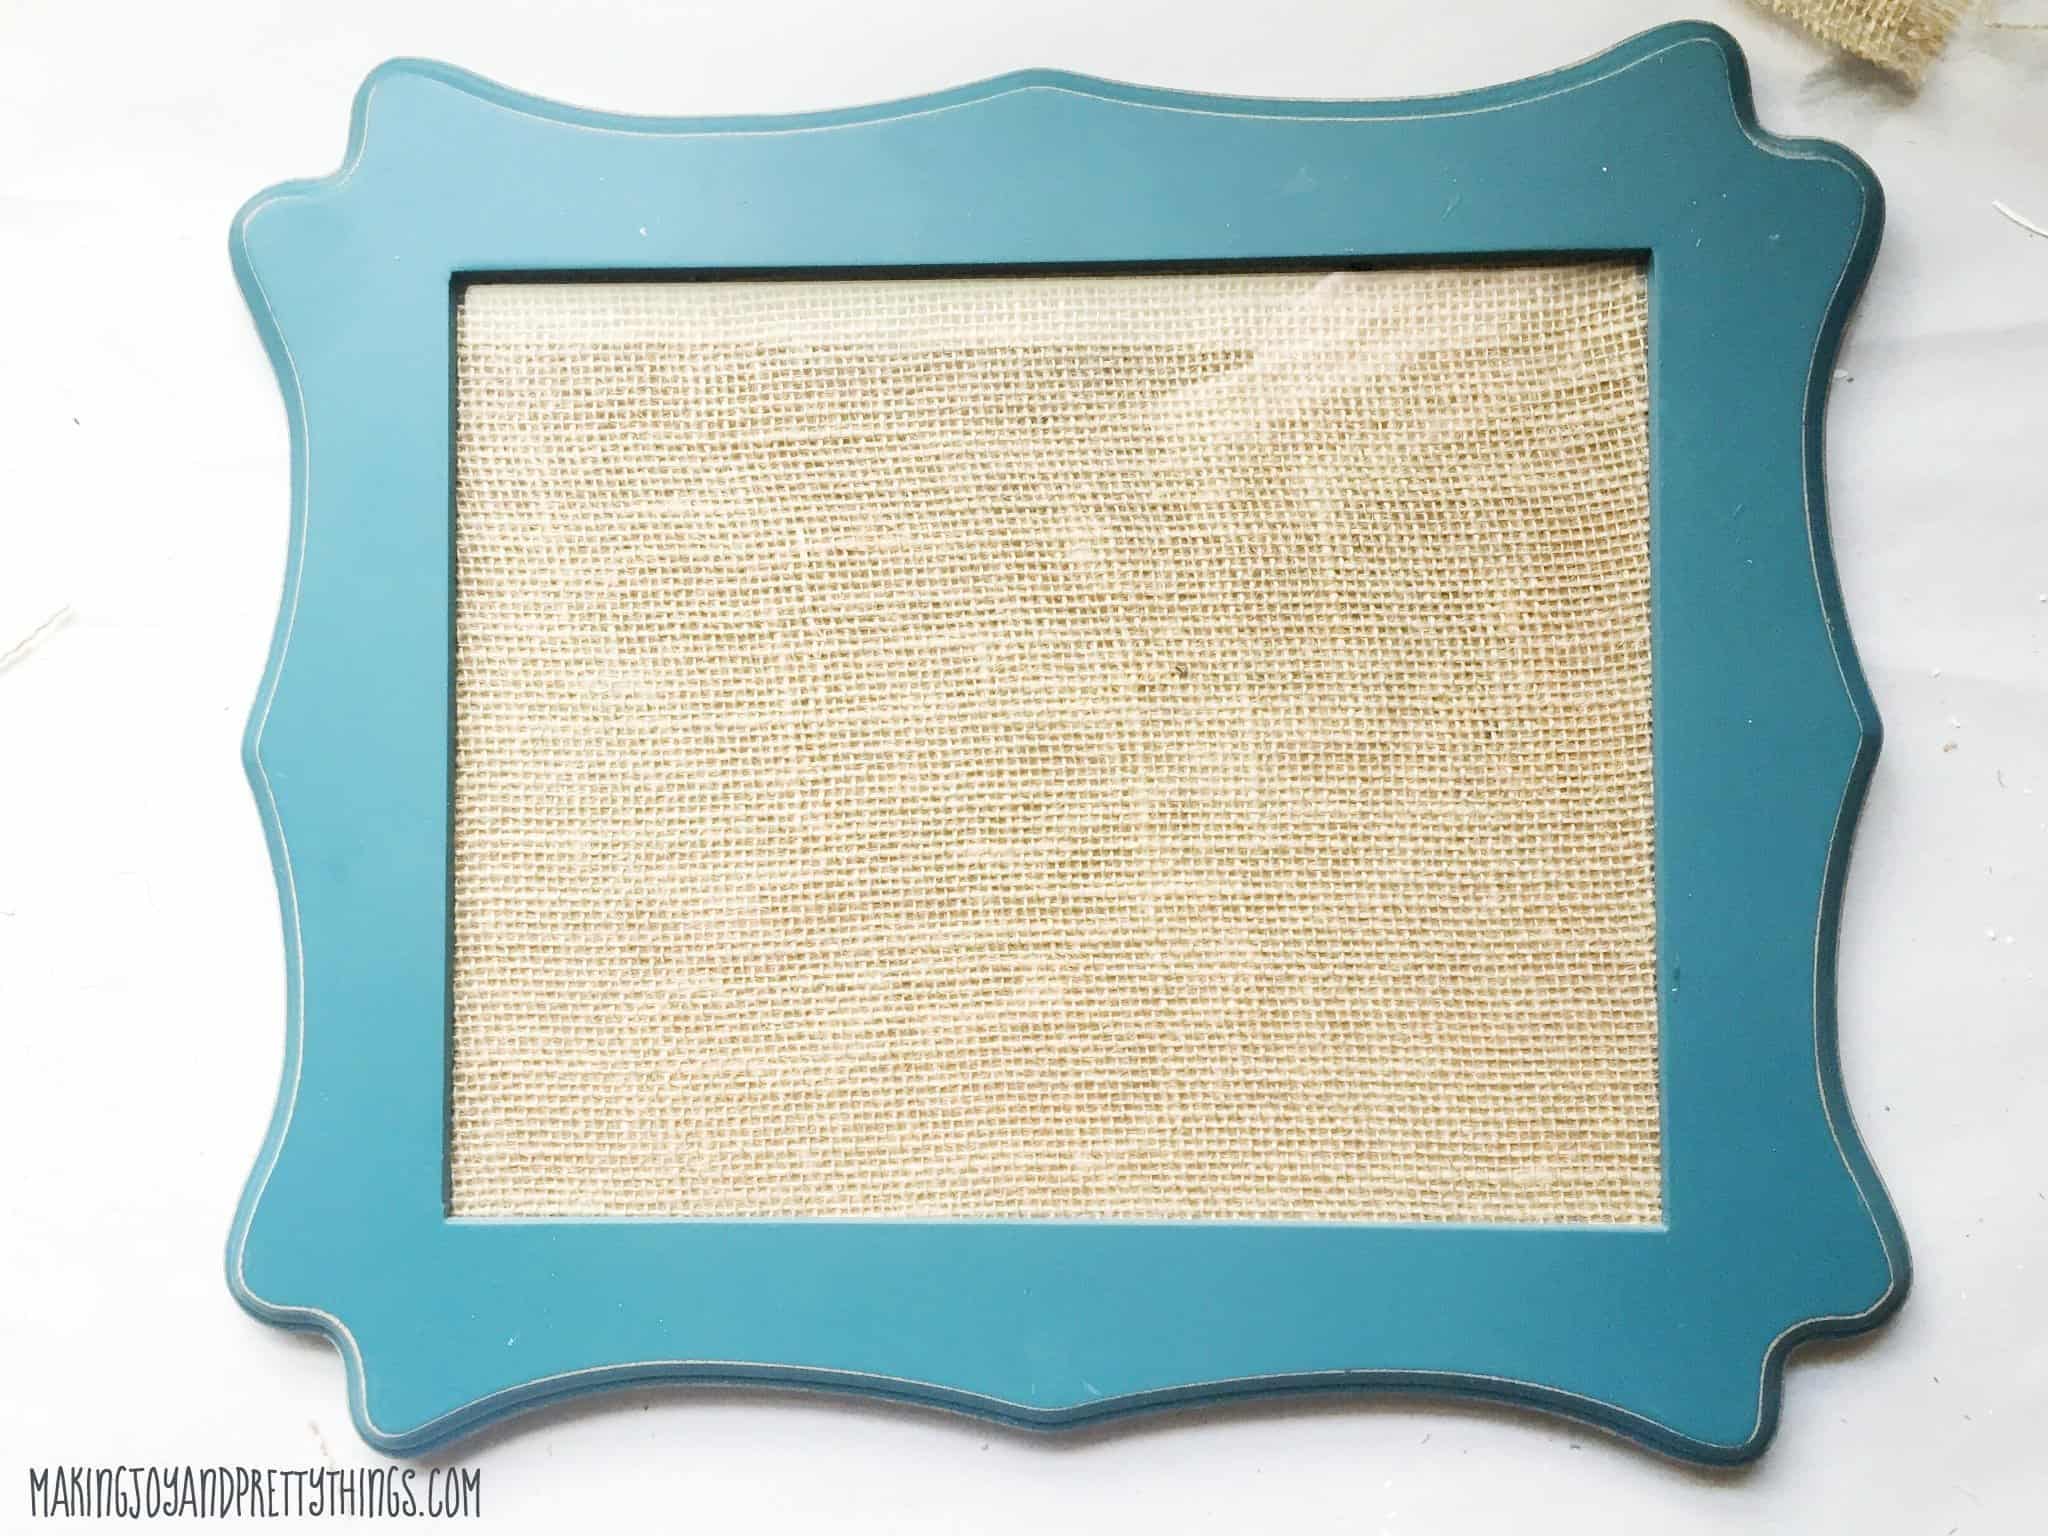 Burlap tray inside a picture frame as a how to DIY using free items around you how thats simple